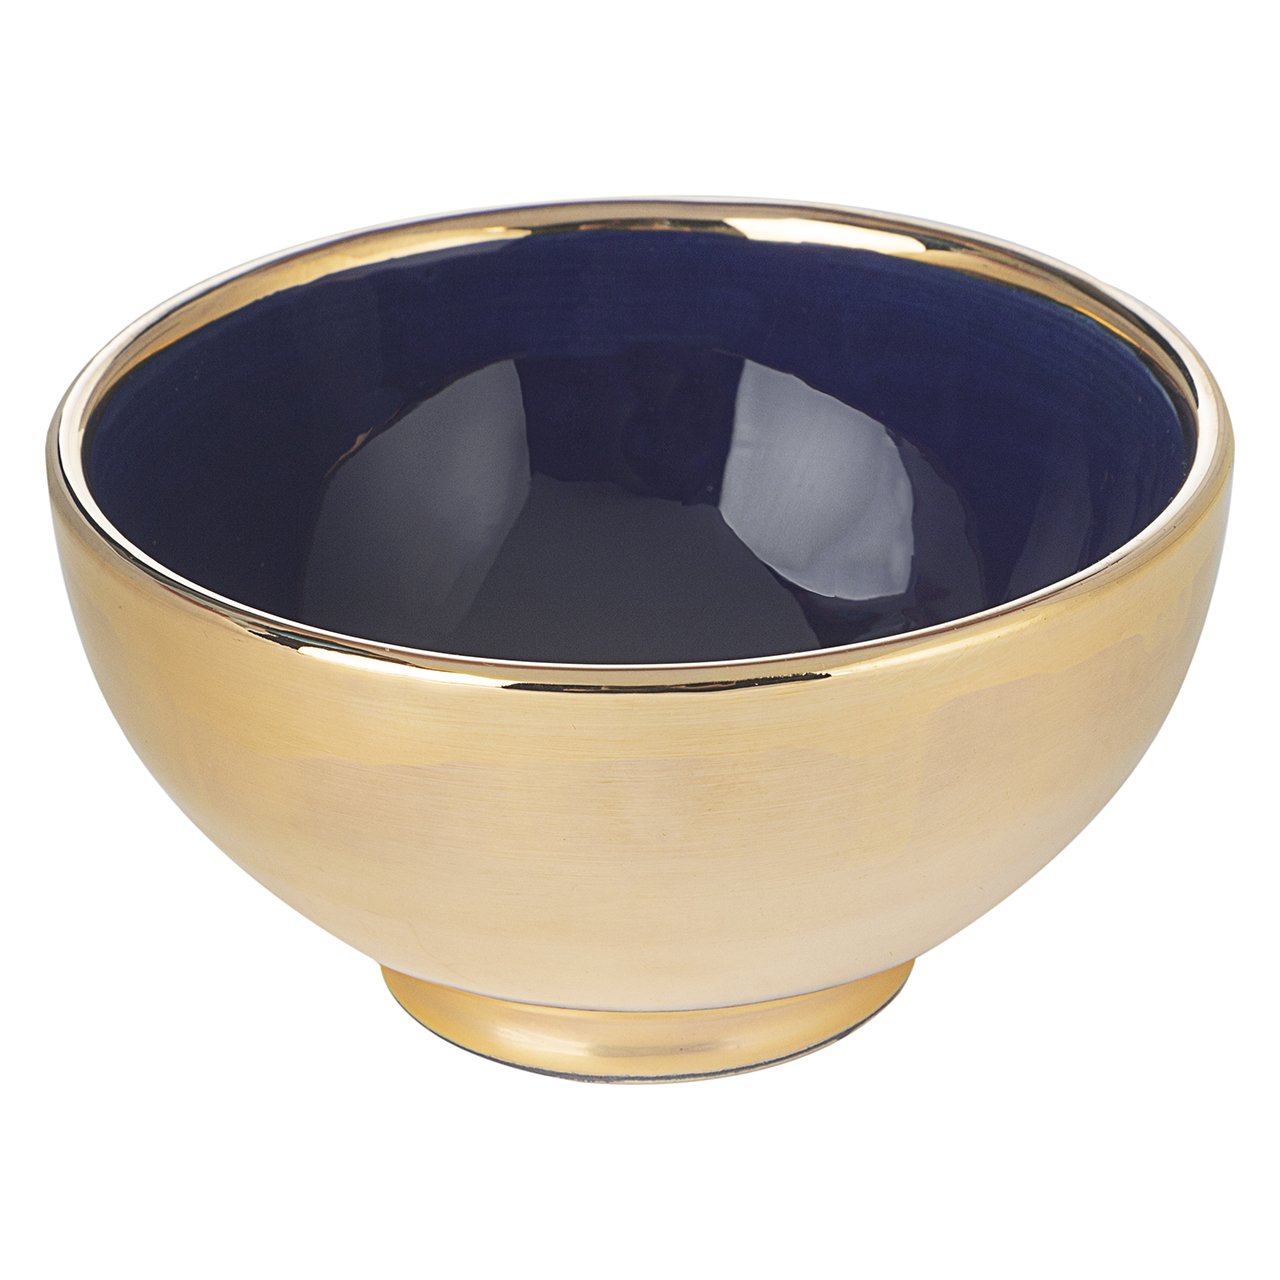 DECORATIVE Rond Ceramic Bowl Handcrafted in 11Kt Gold- Size 3